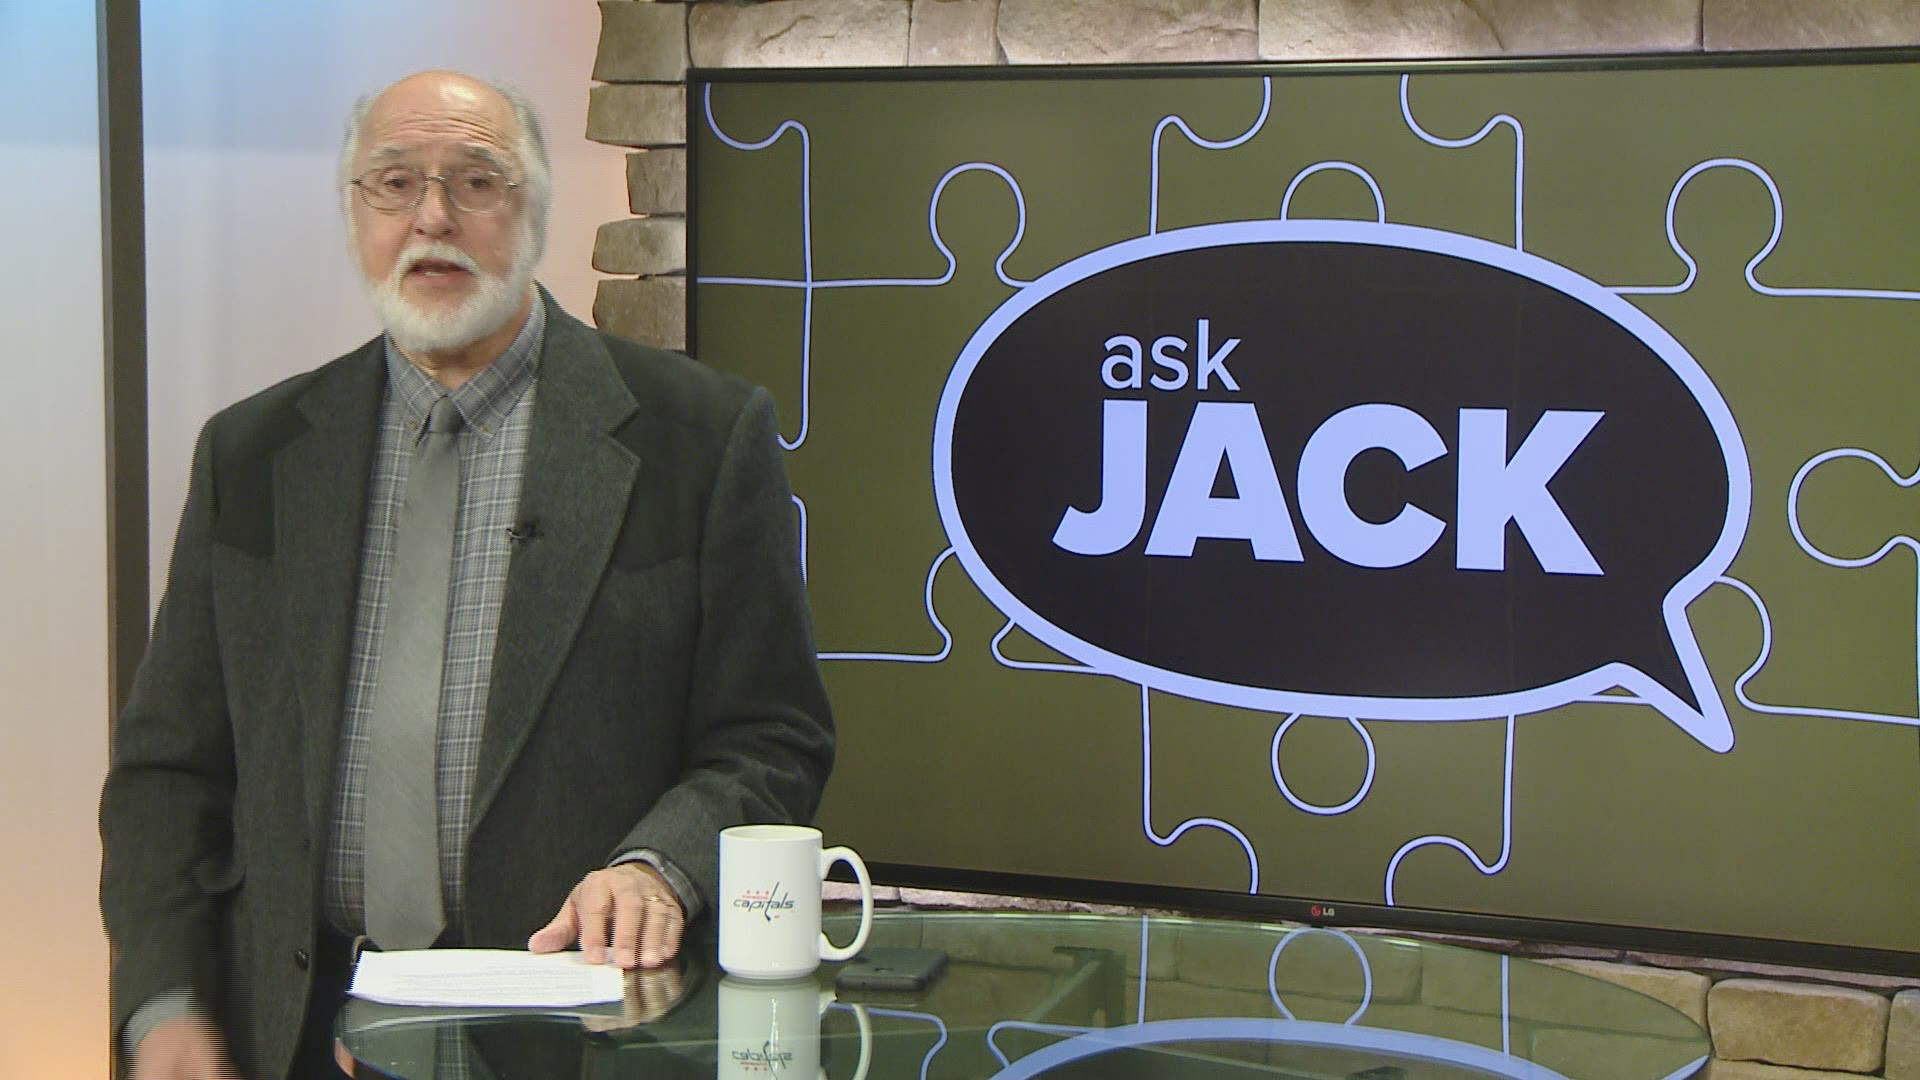 Jack Burke asks viewers for their experiences volunteering or giving to charity.